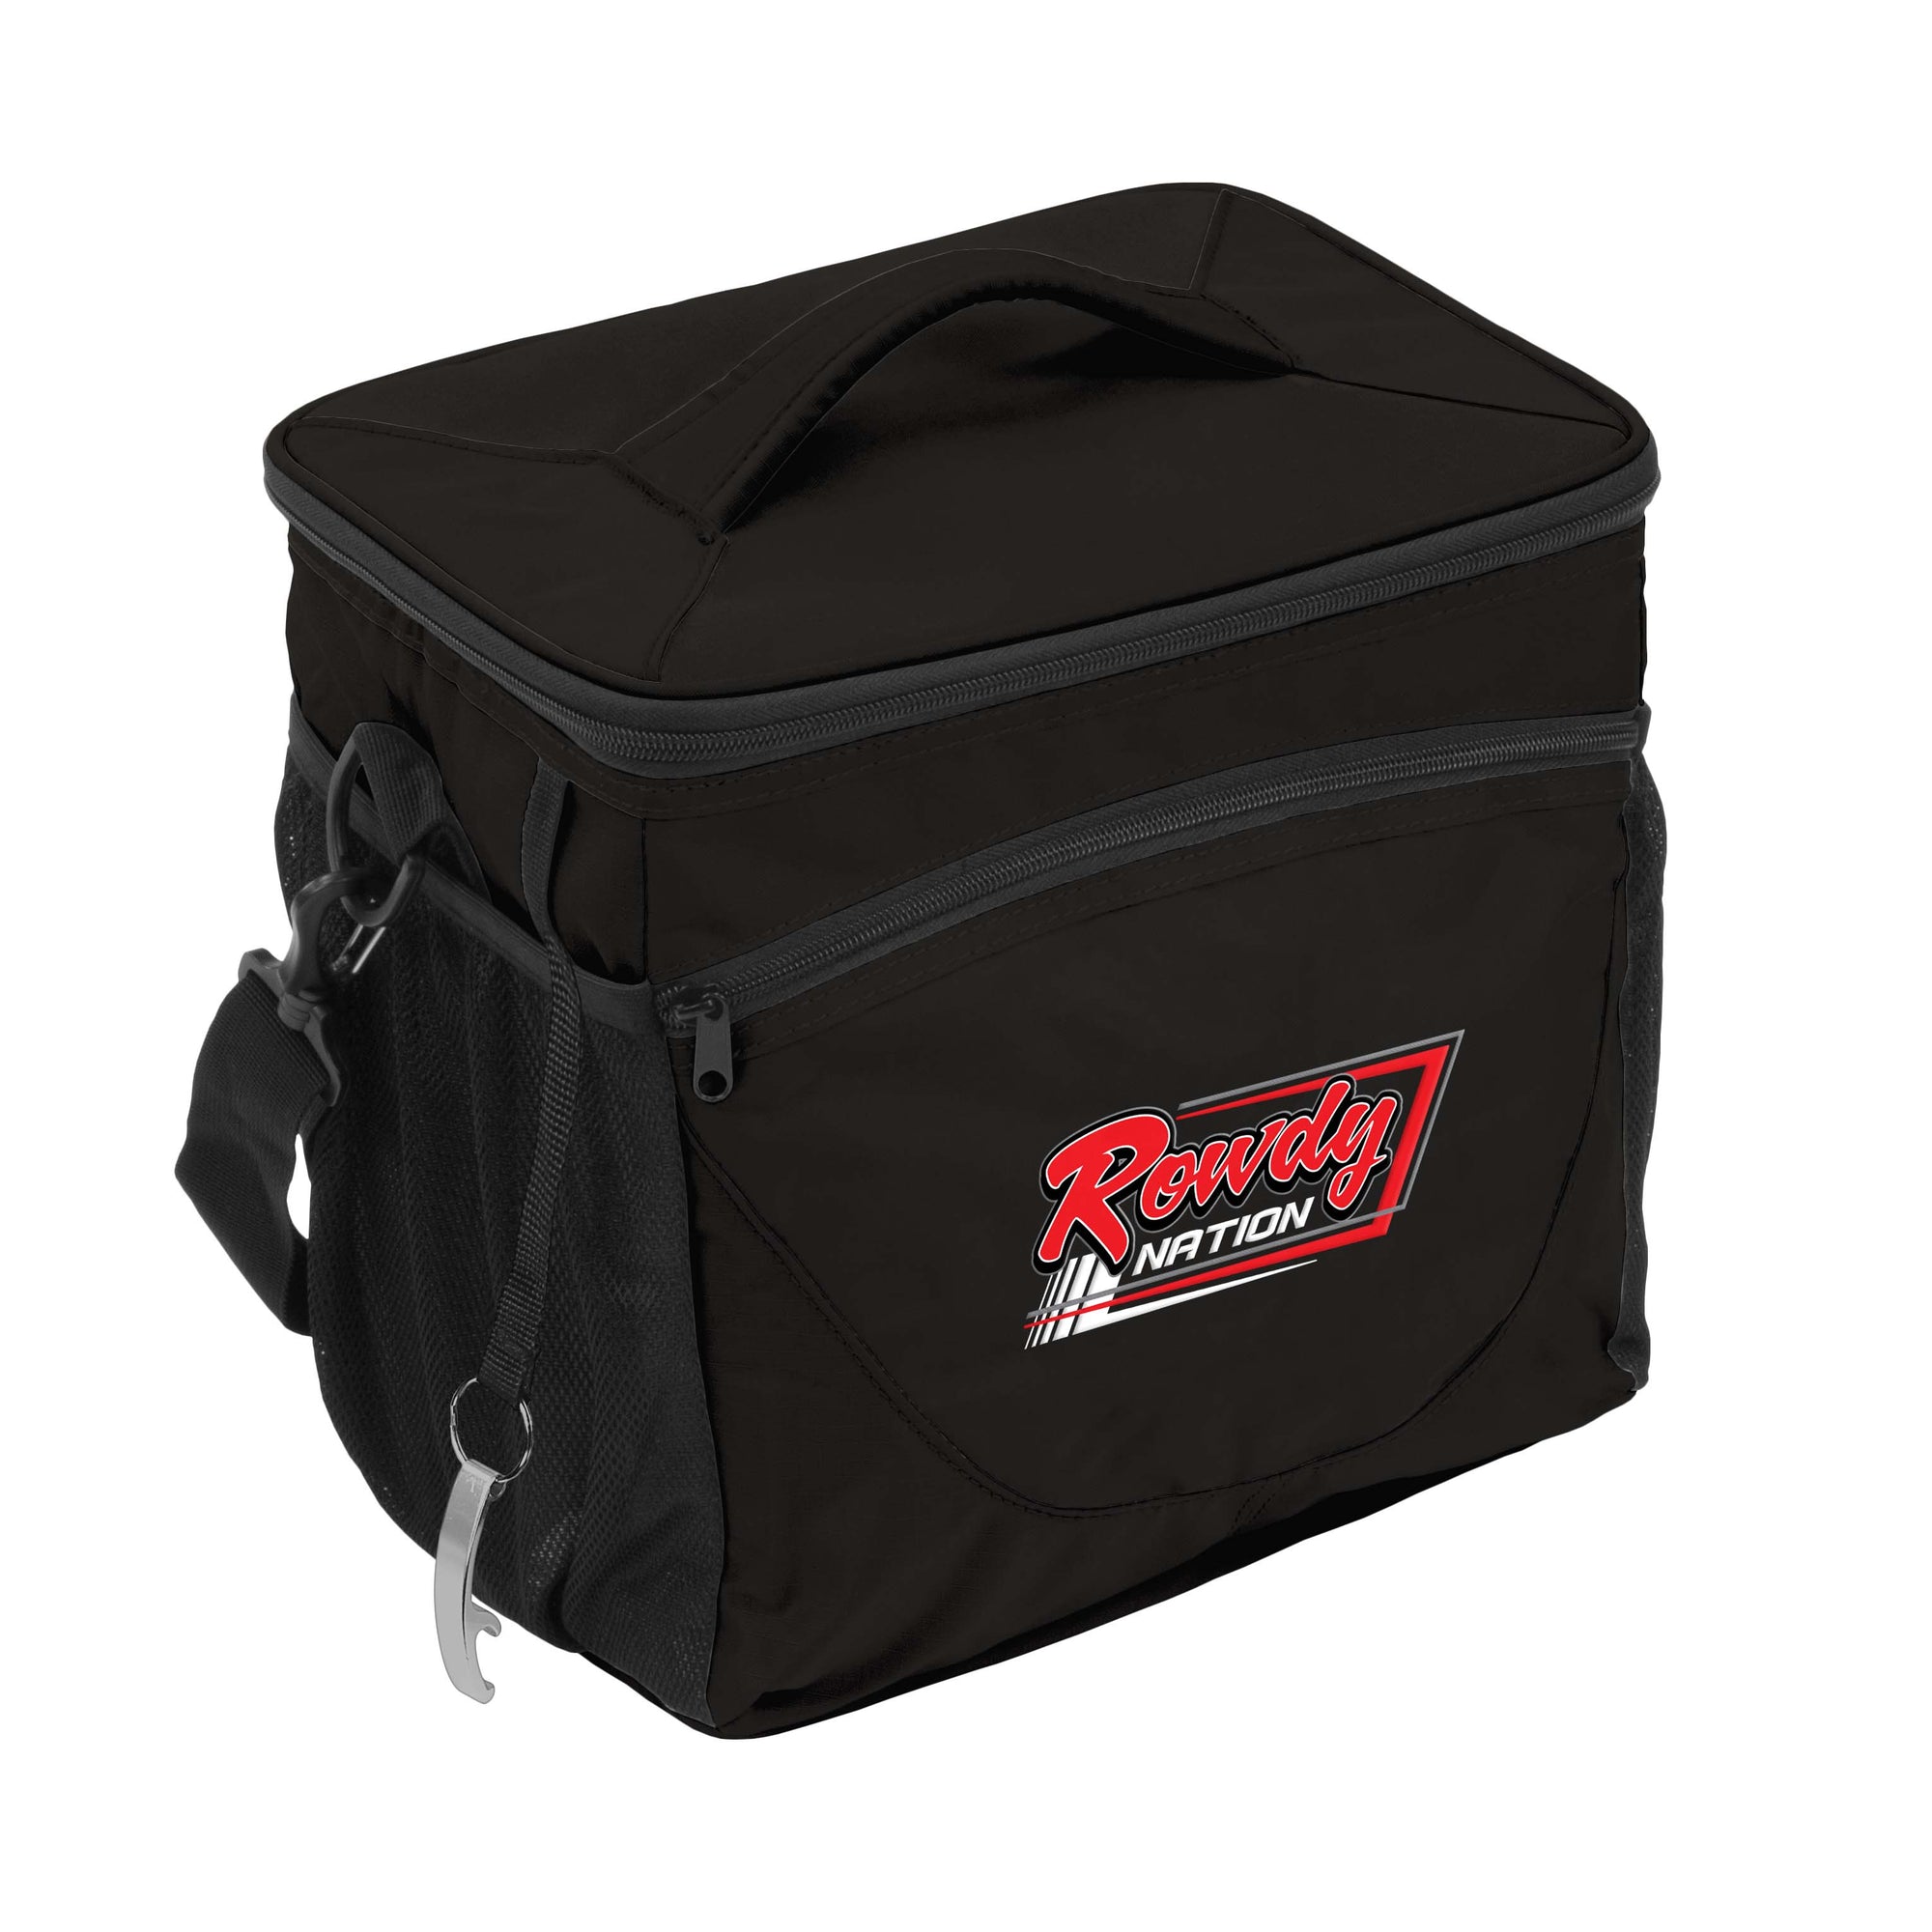 Rowdy Nation 24 Can Cooler